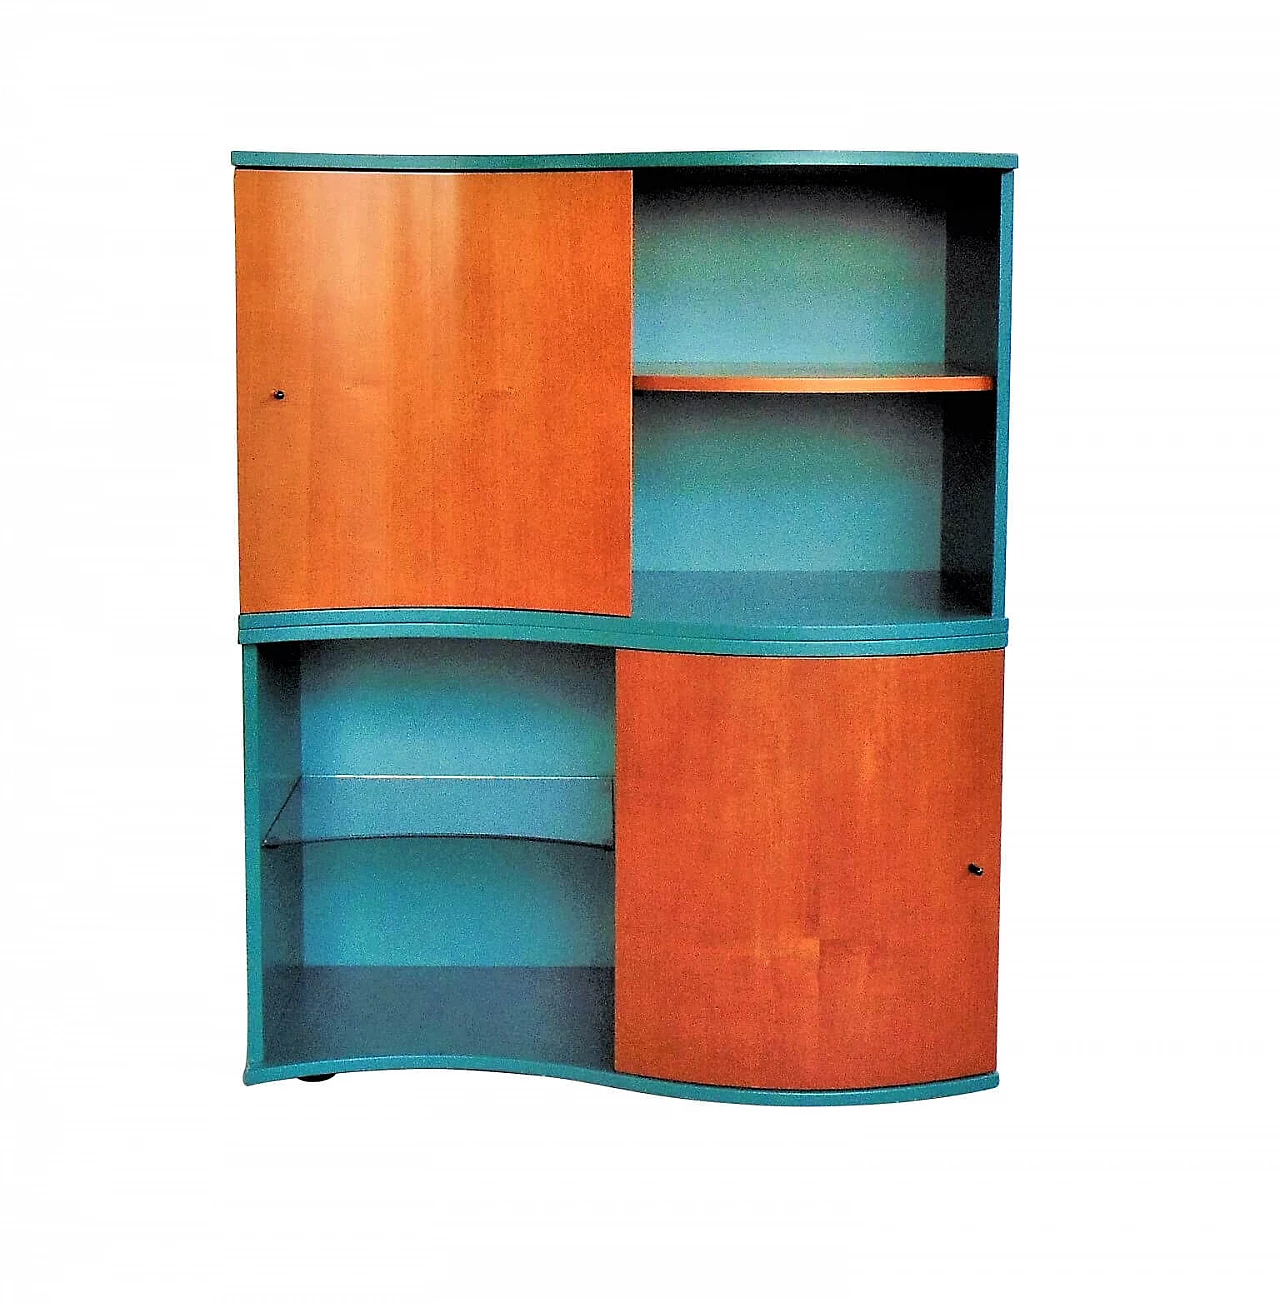 Sideboard Green Satin Lacquer, Doors in Walnut-Stained Cherry, for Roche Bobois, 1990s 1167407